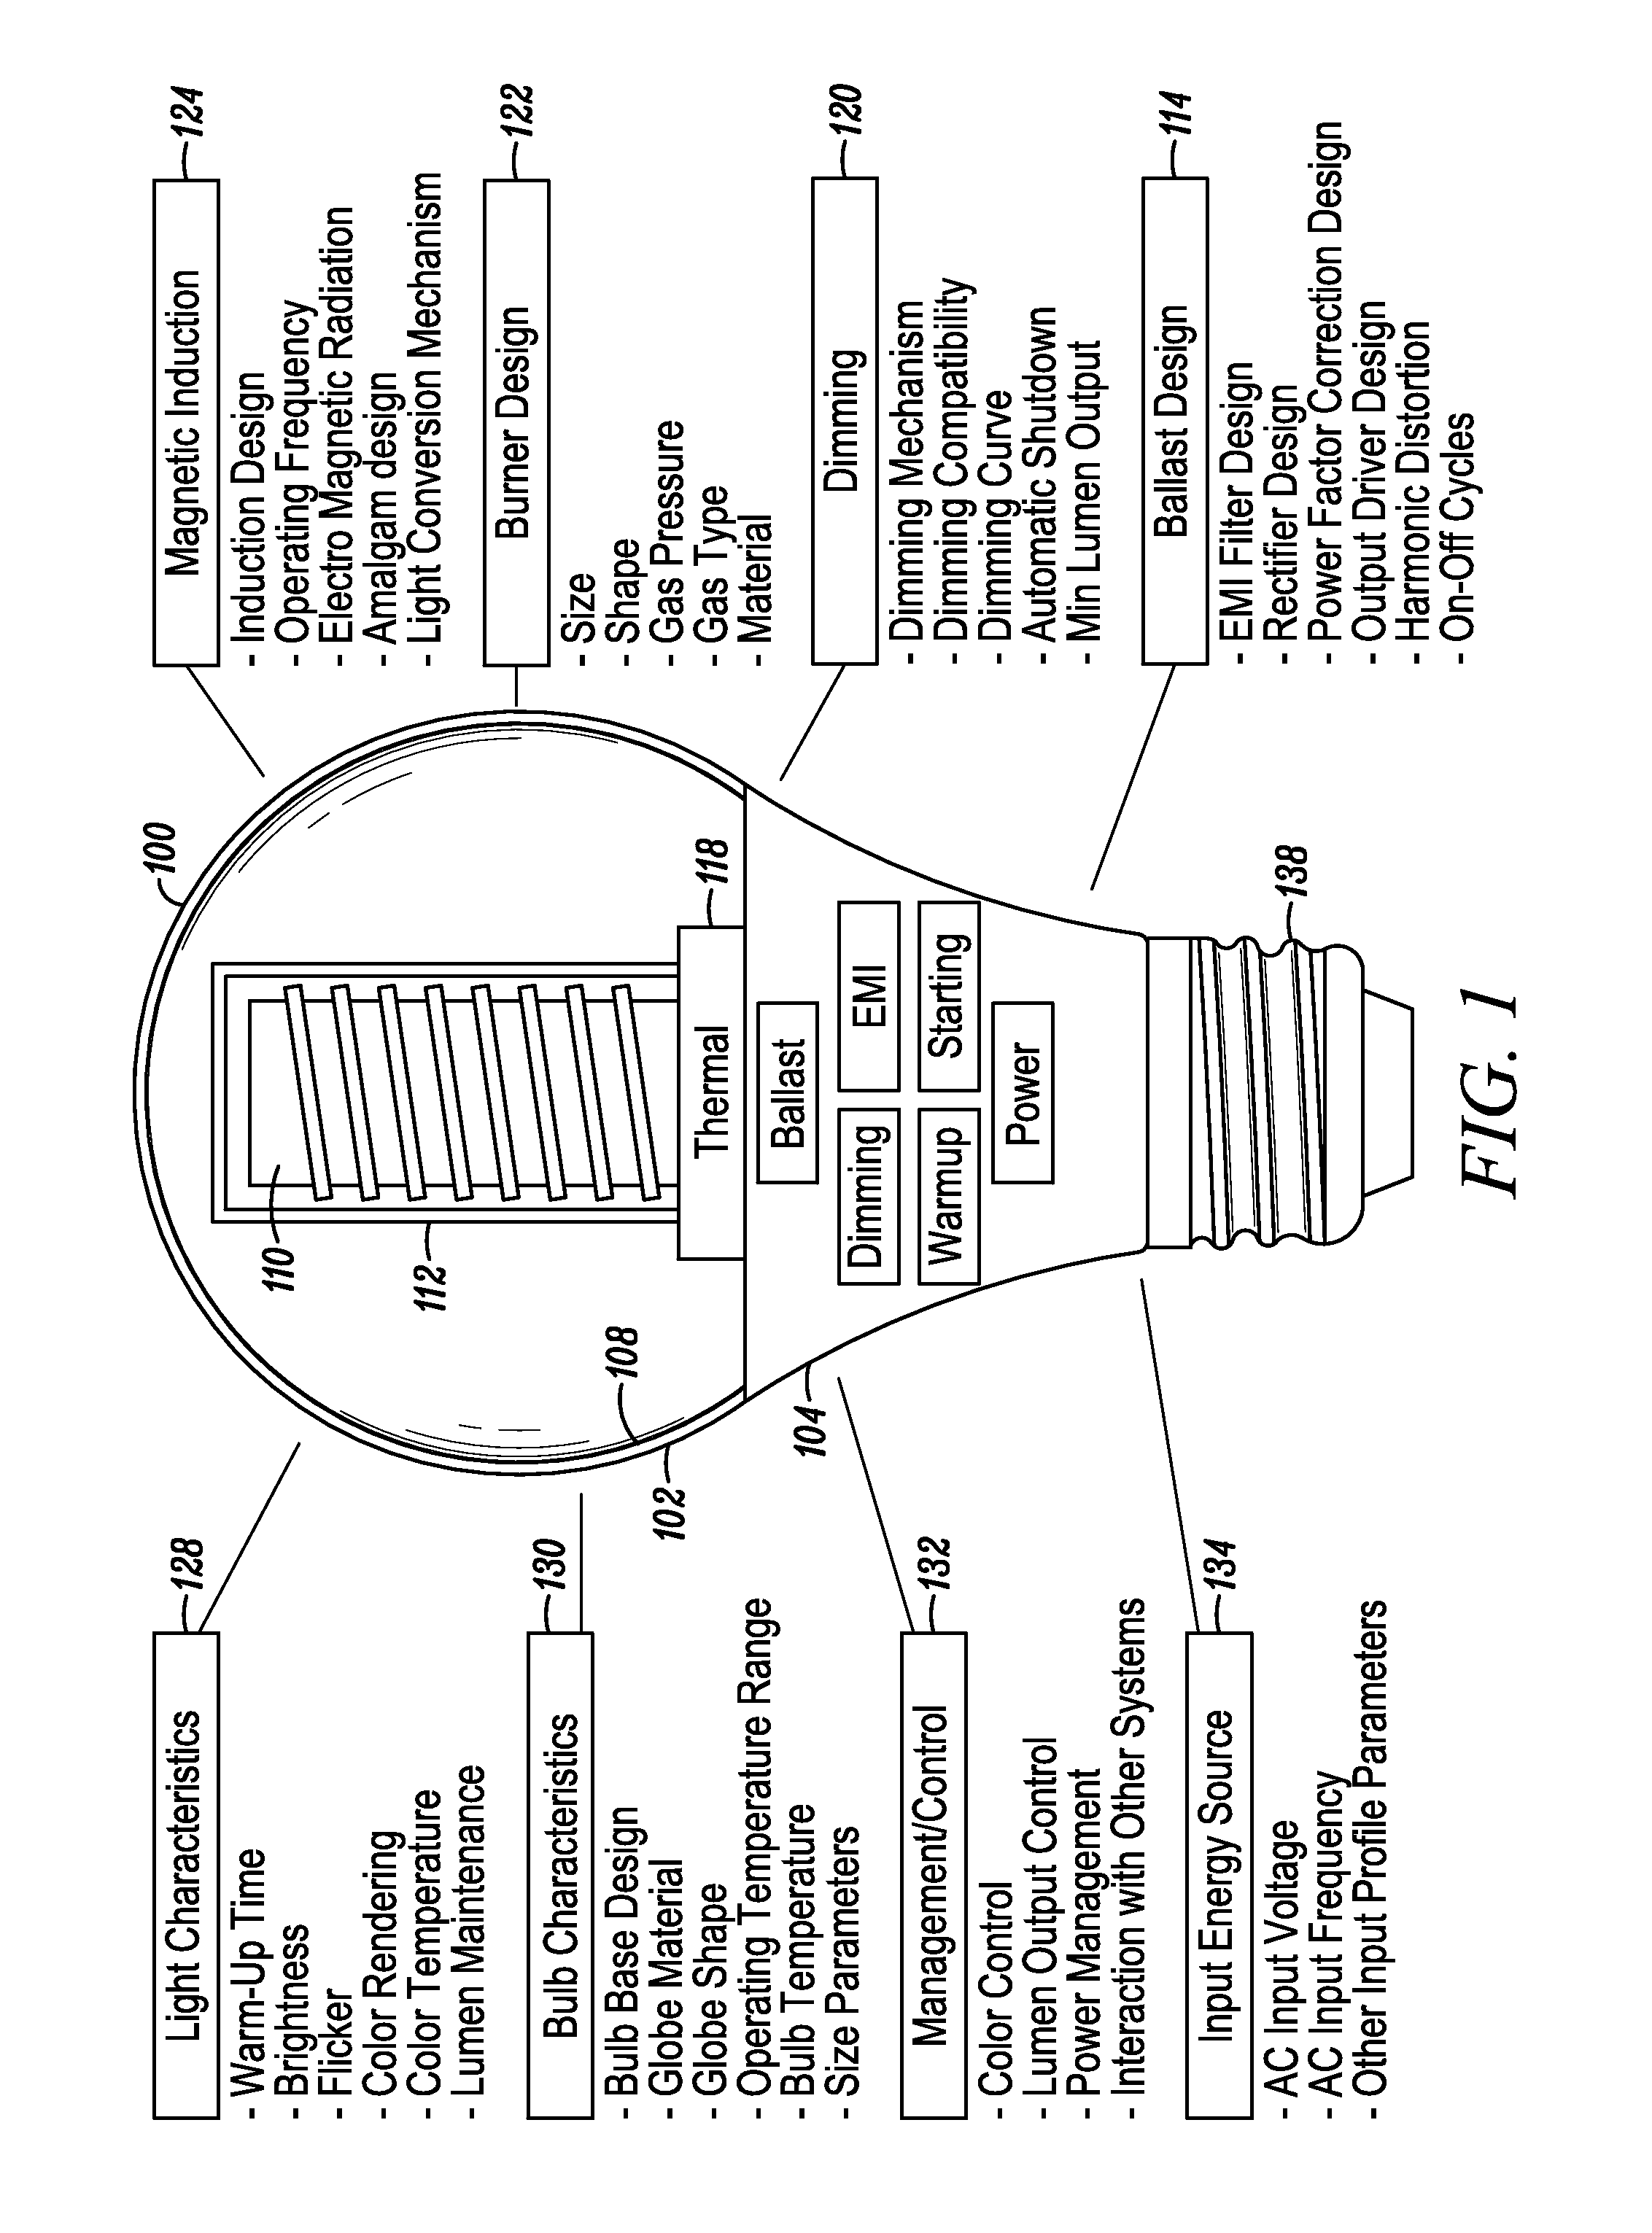 Electronic ballast having improved power factor and total harmonic distortion